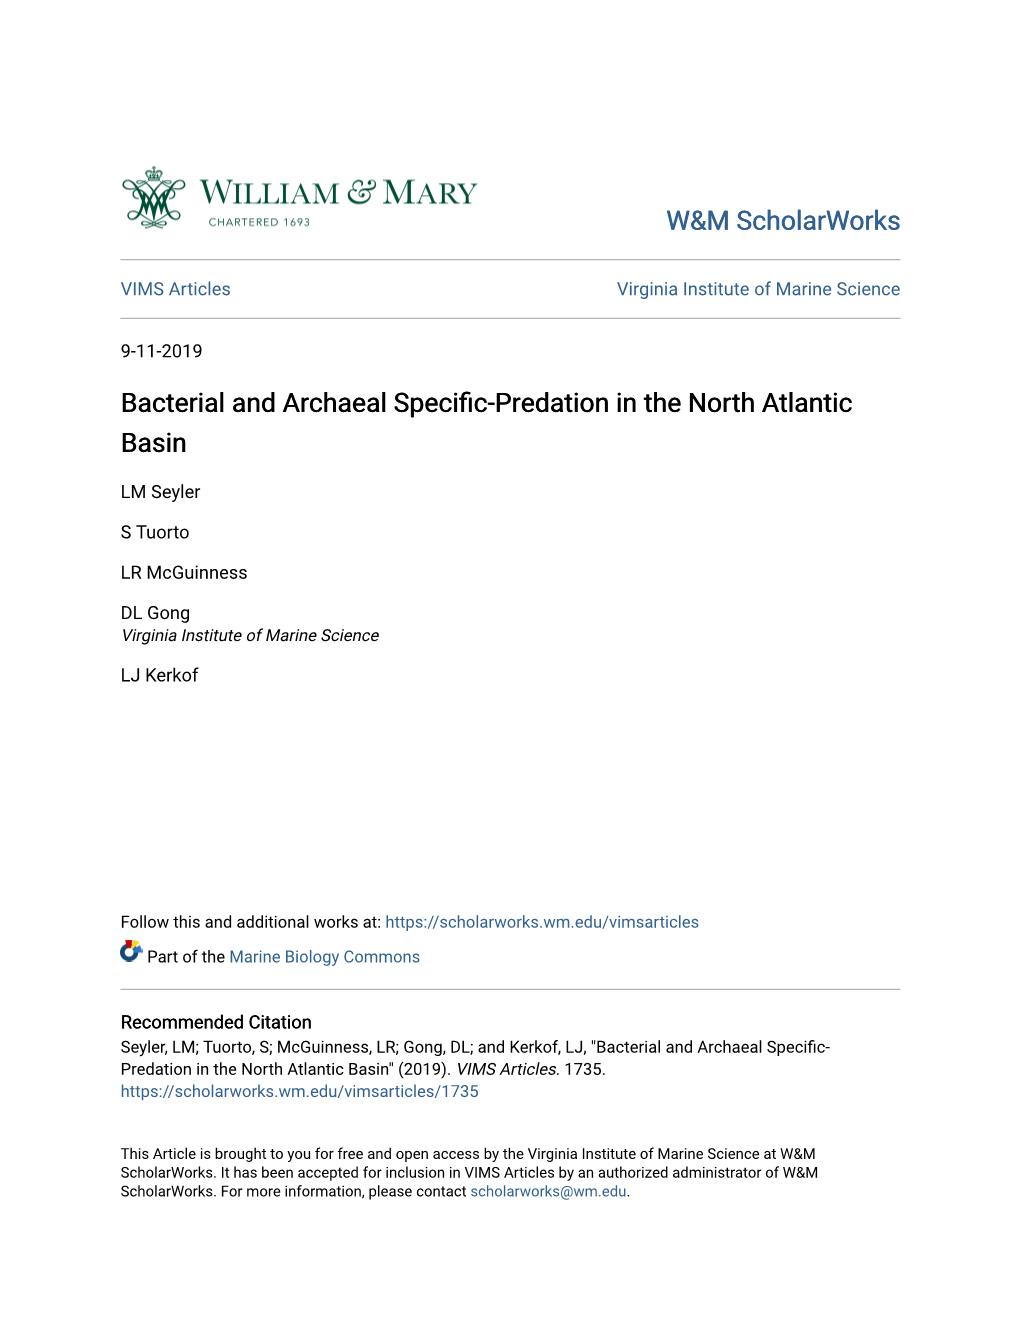 Bacterial and Archaeal Specific-Predation in the North Atlantic Basin